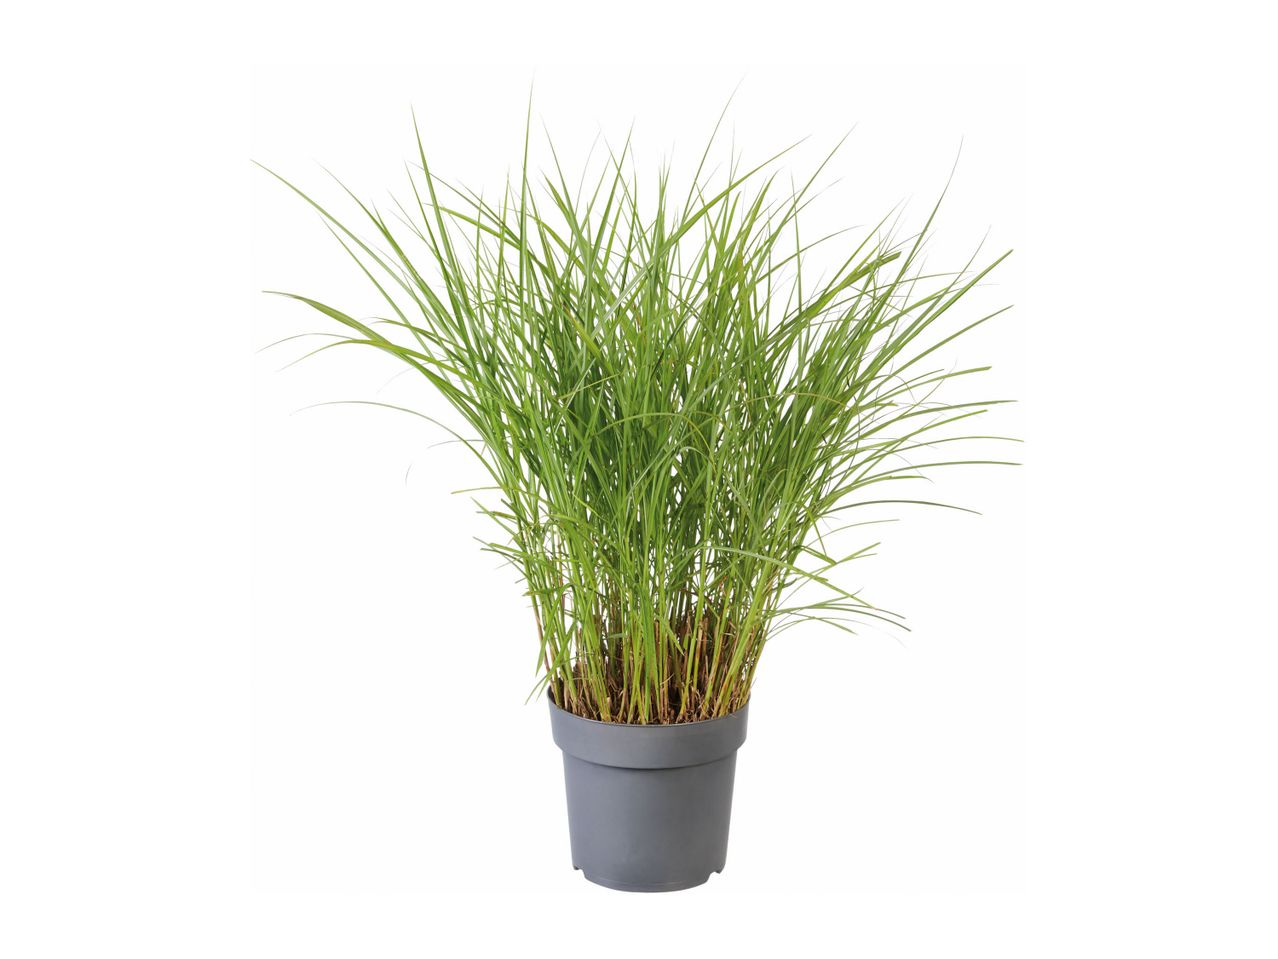 Go to full screen view: Pennisetum Grass - Image 1